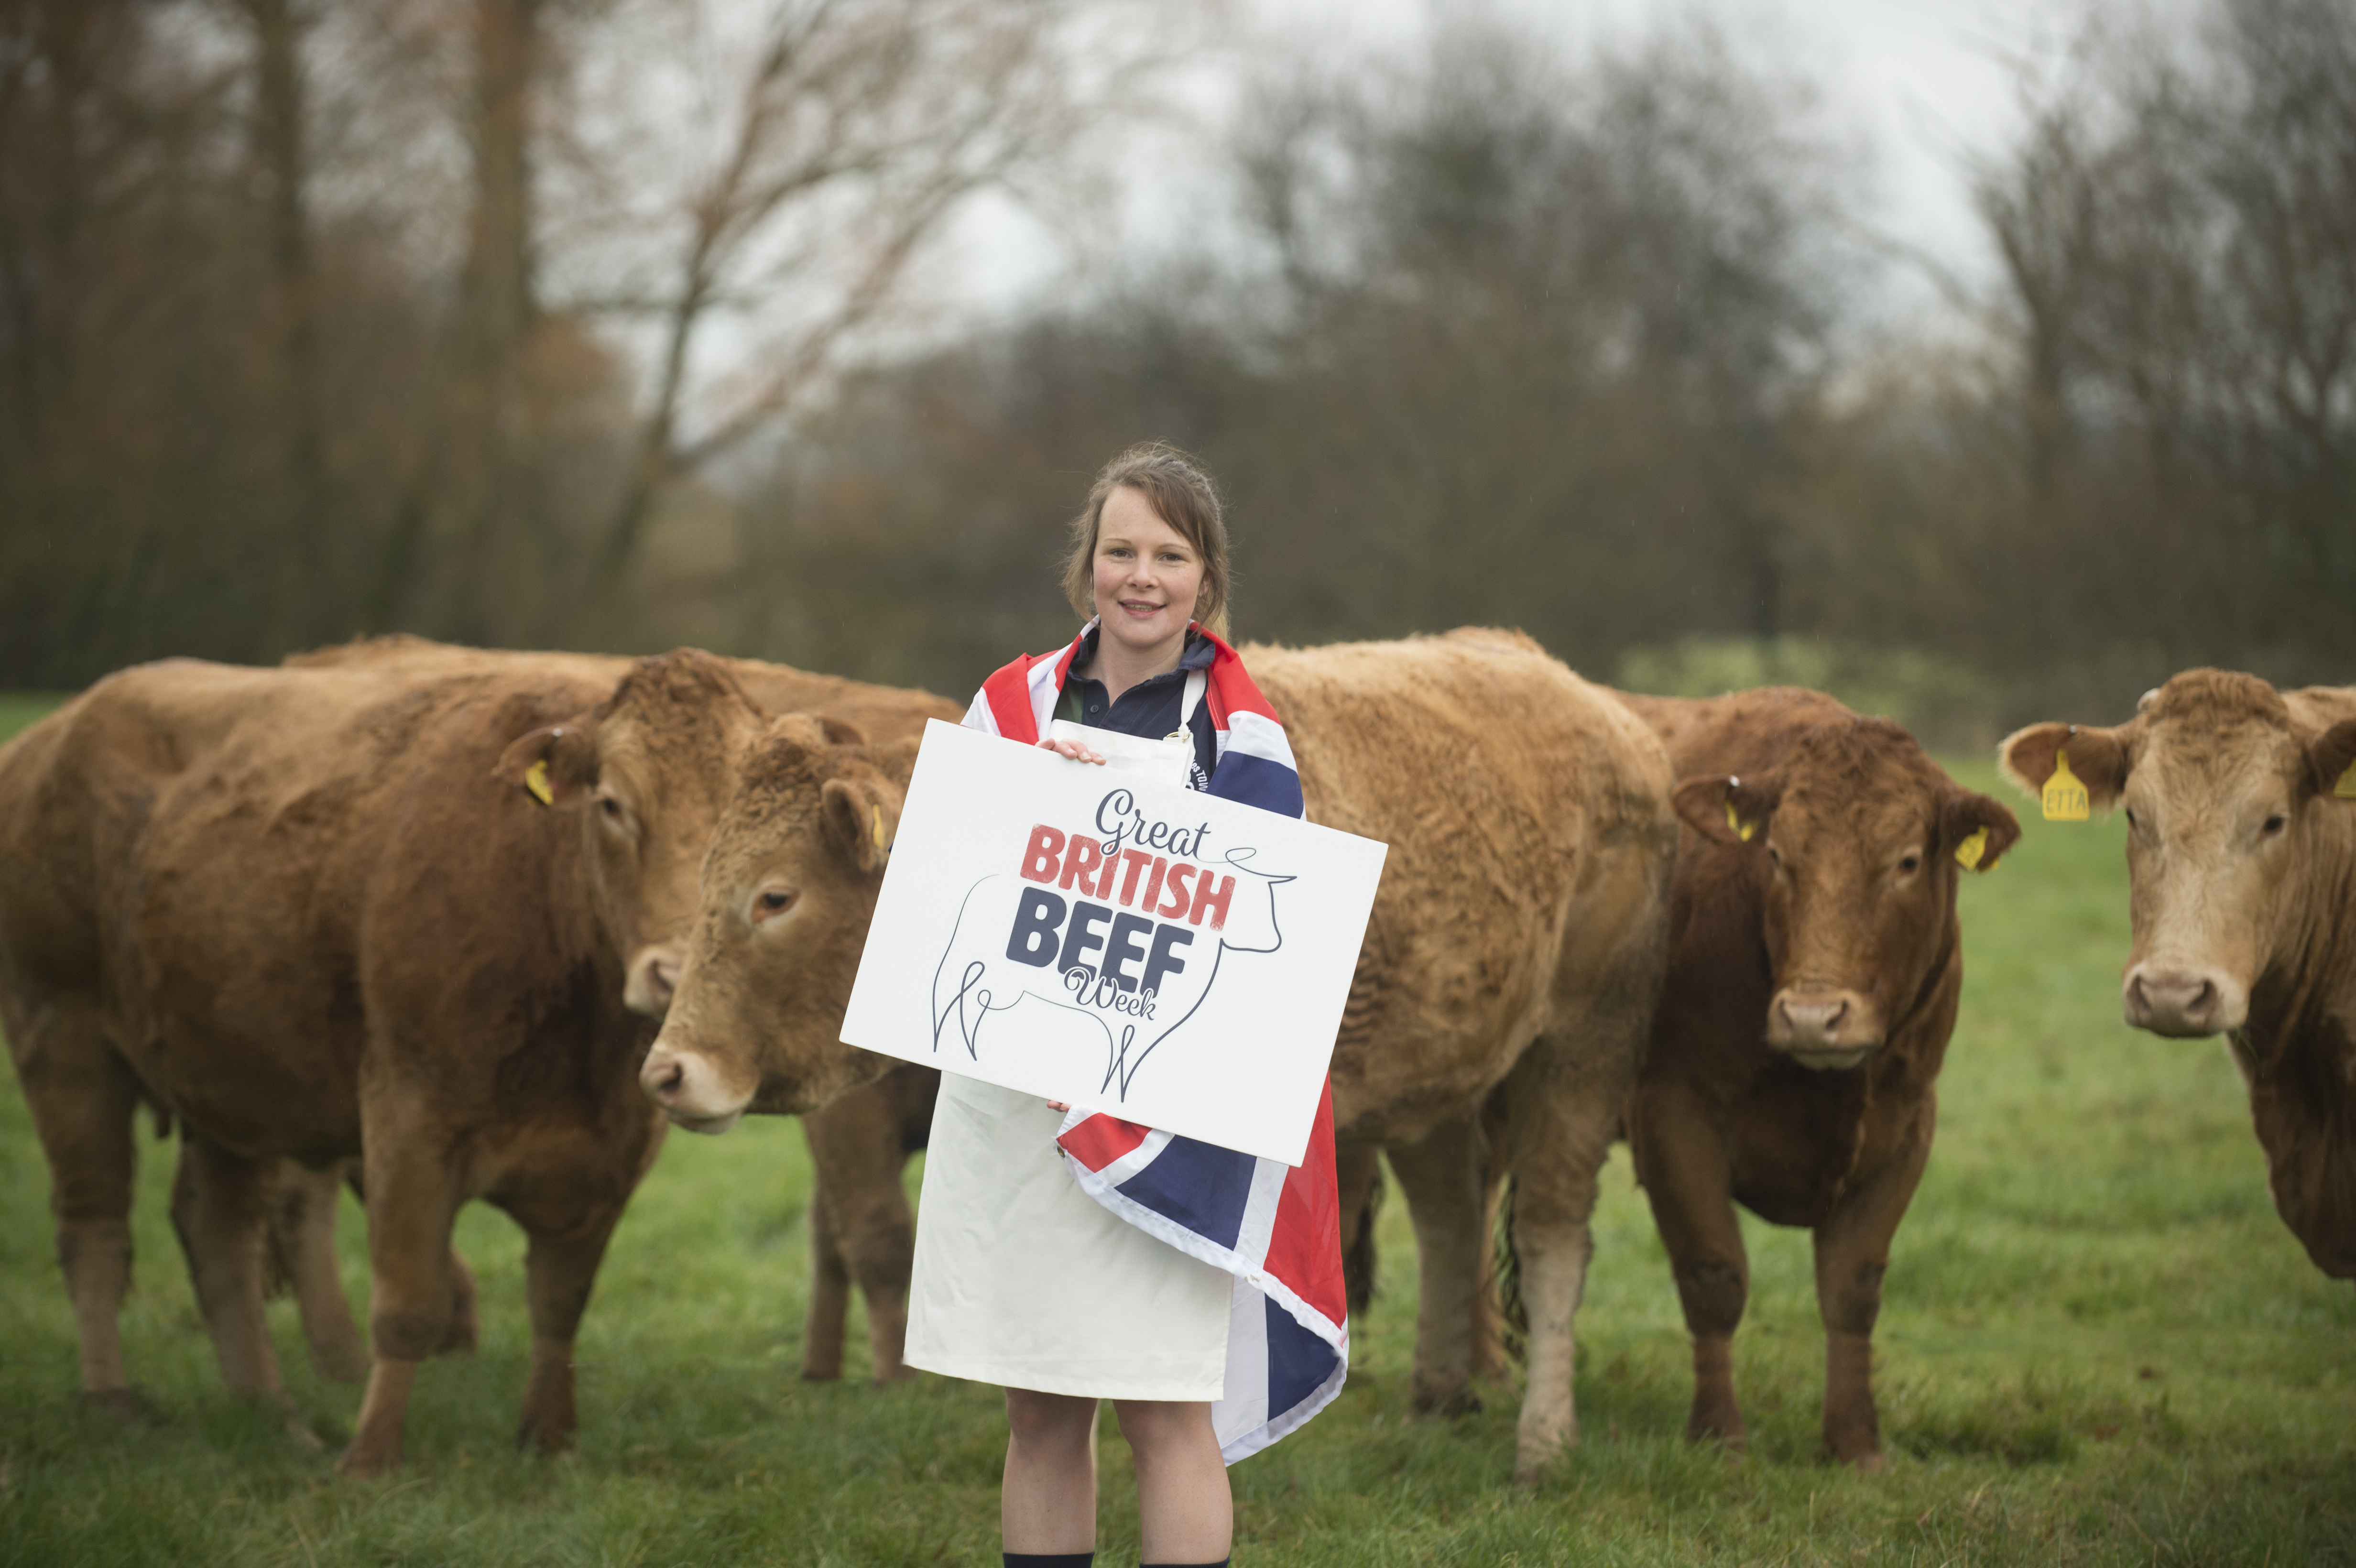 Farming News Public urged to support Great British Beef Week campaign